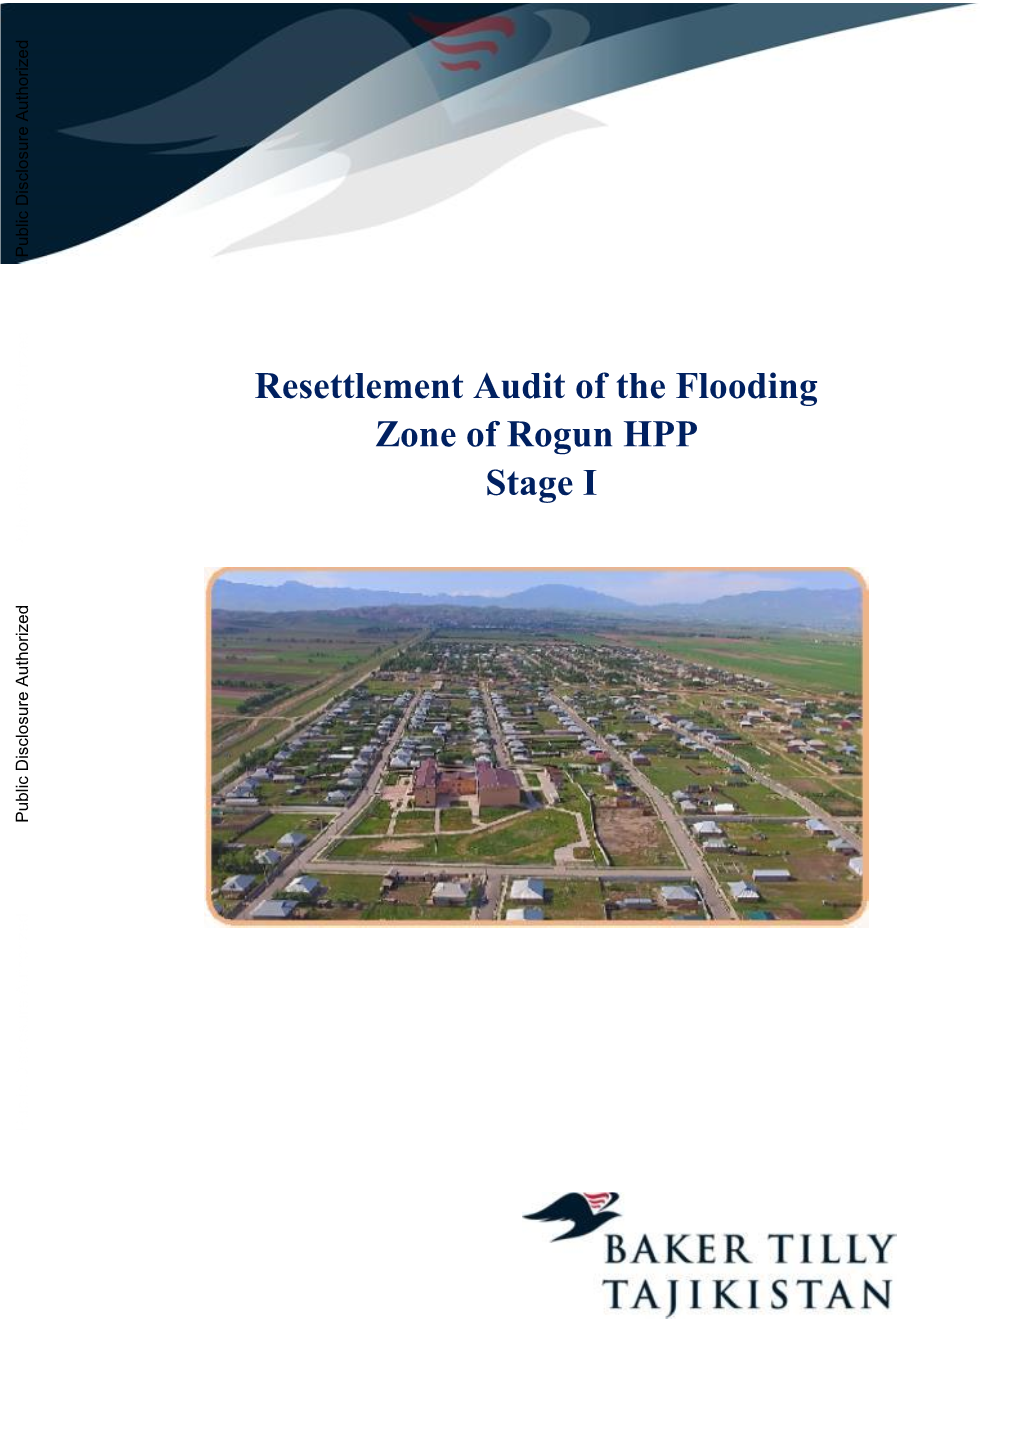 Resettlement Audit of the Flooding Zone of Rogun HPP Stage I